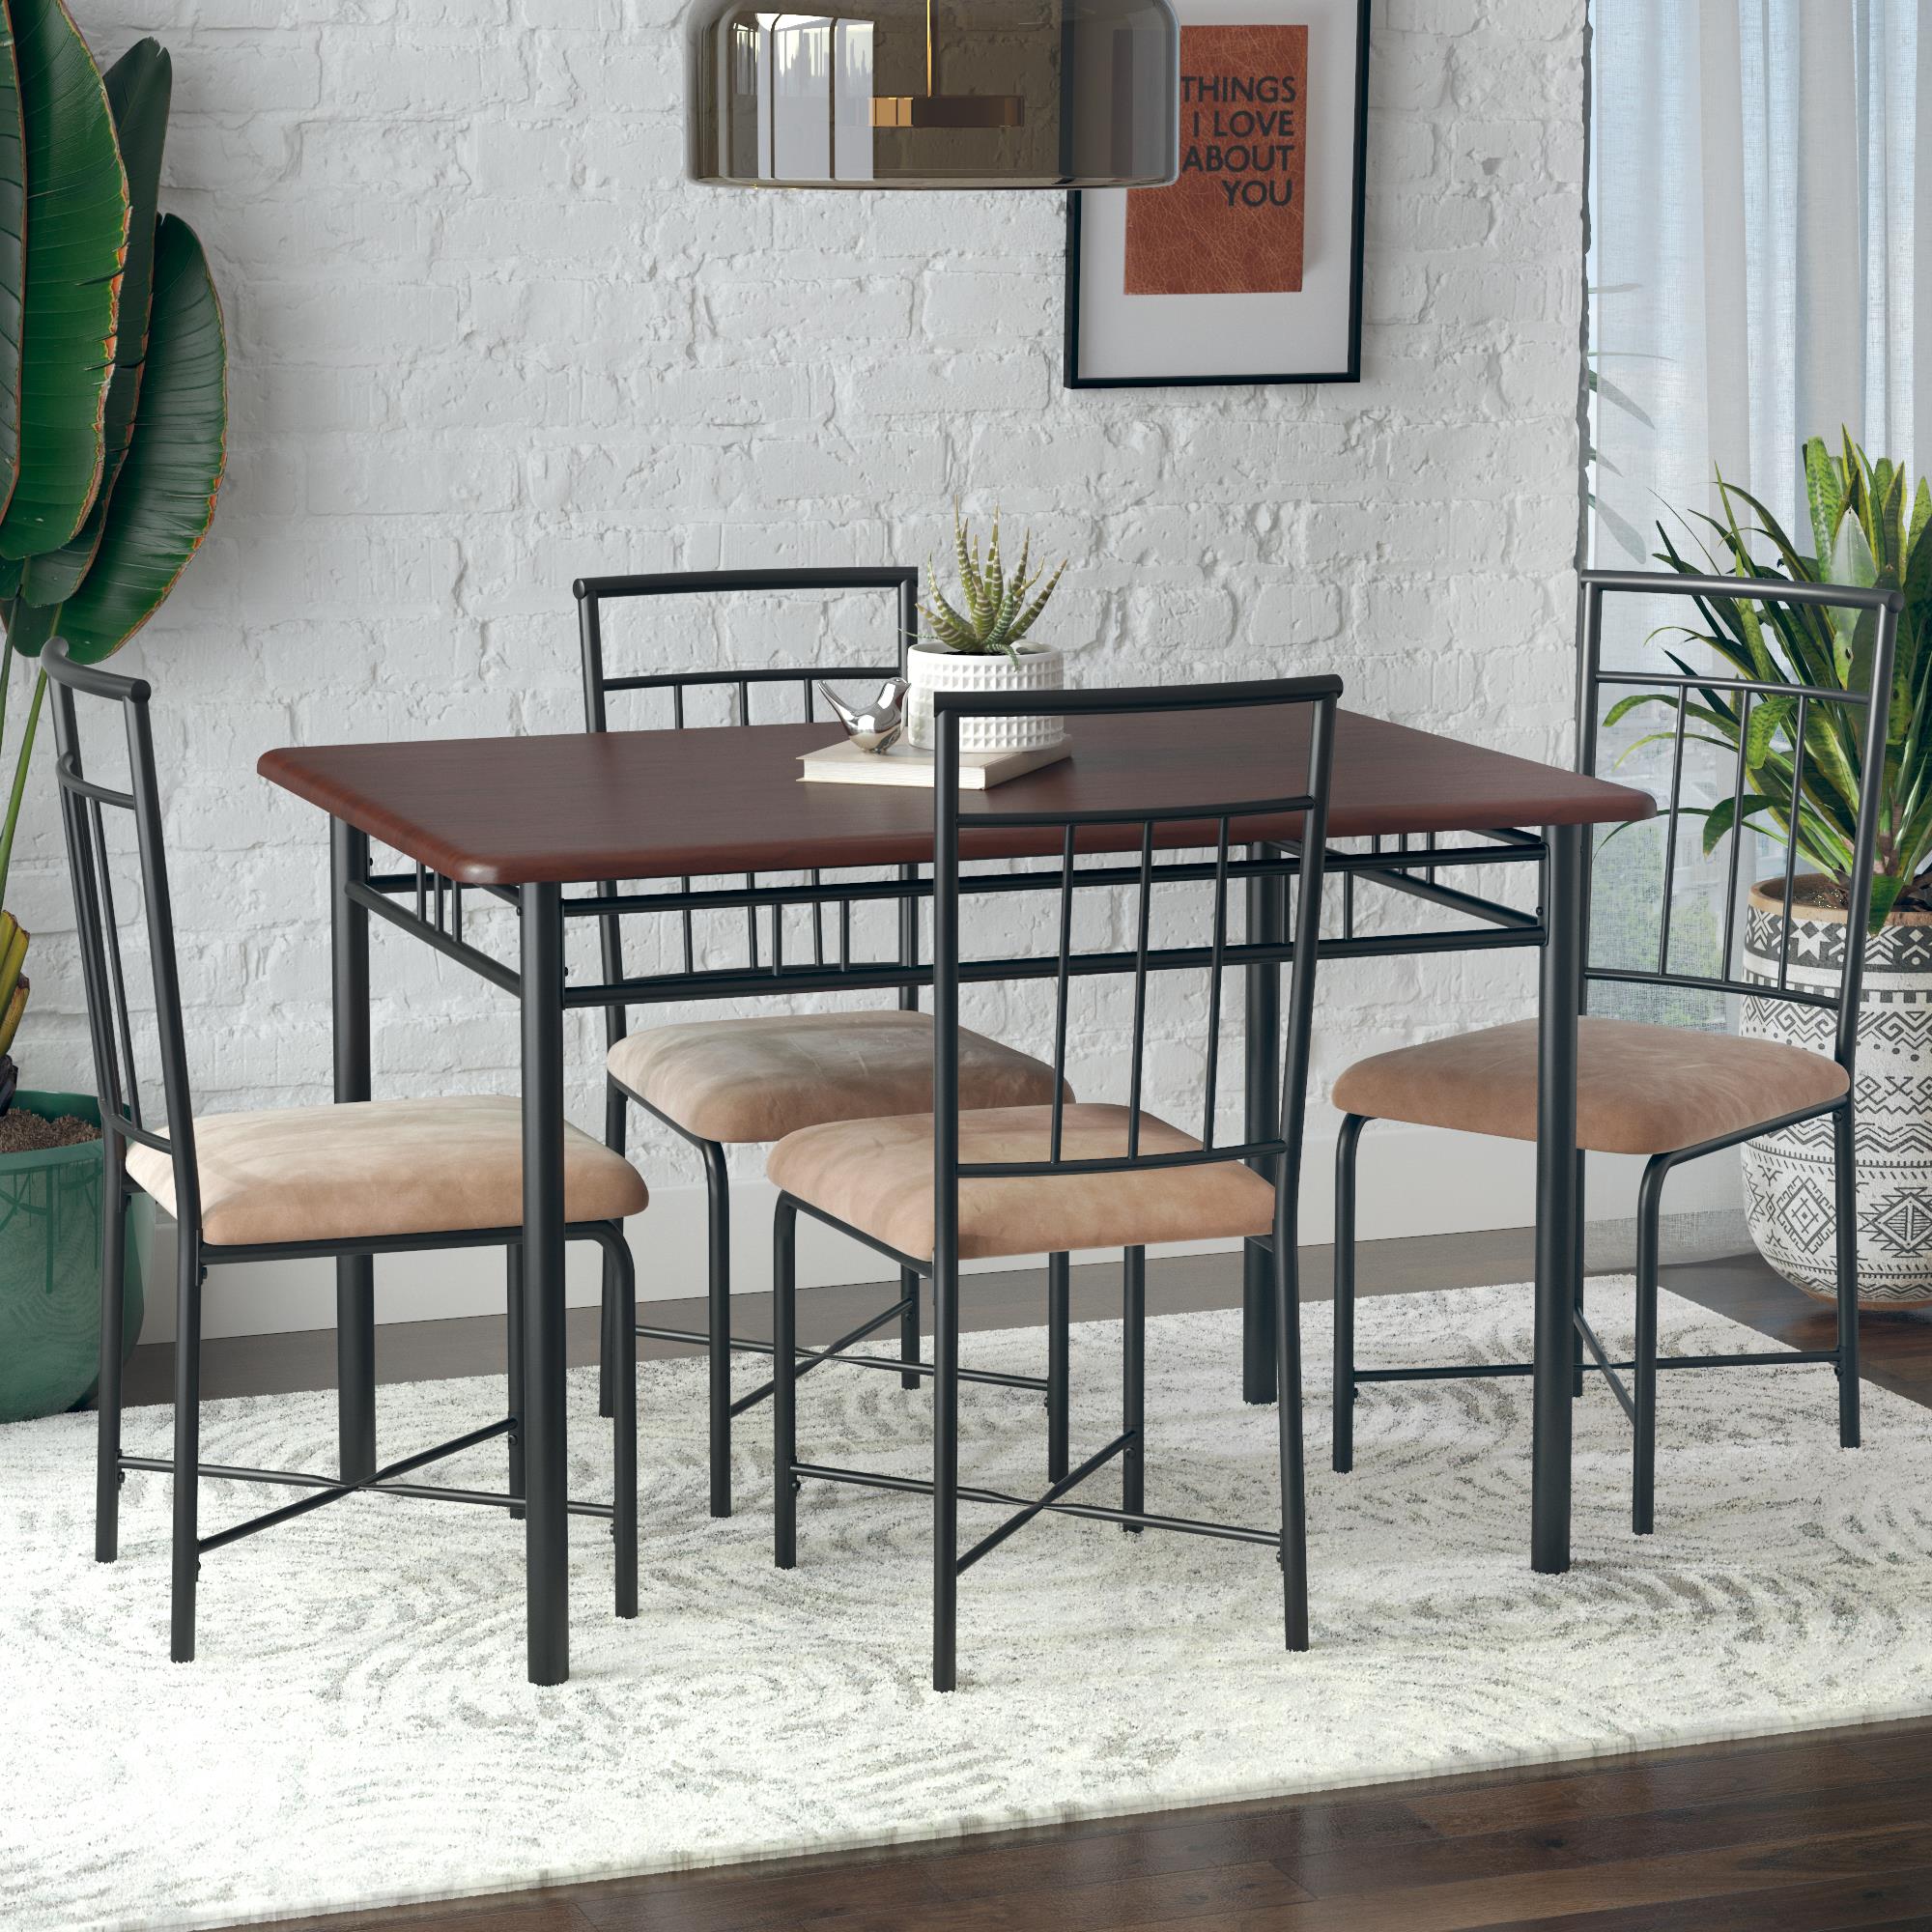 Mainstays Louise Traditional 5-Piece Wood & Metal Dining Set, Deep Walnut - image 2 of 22